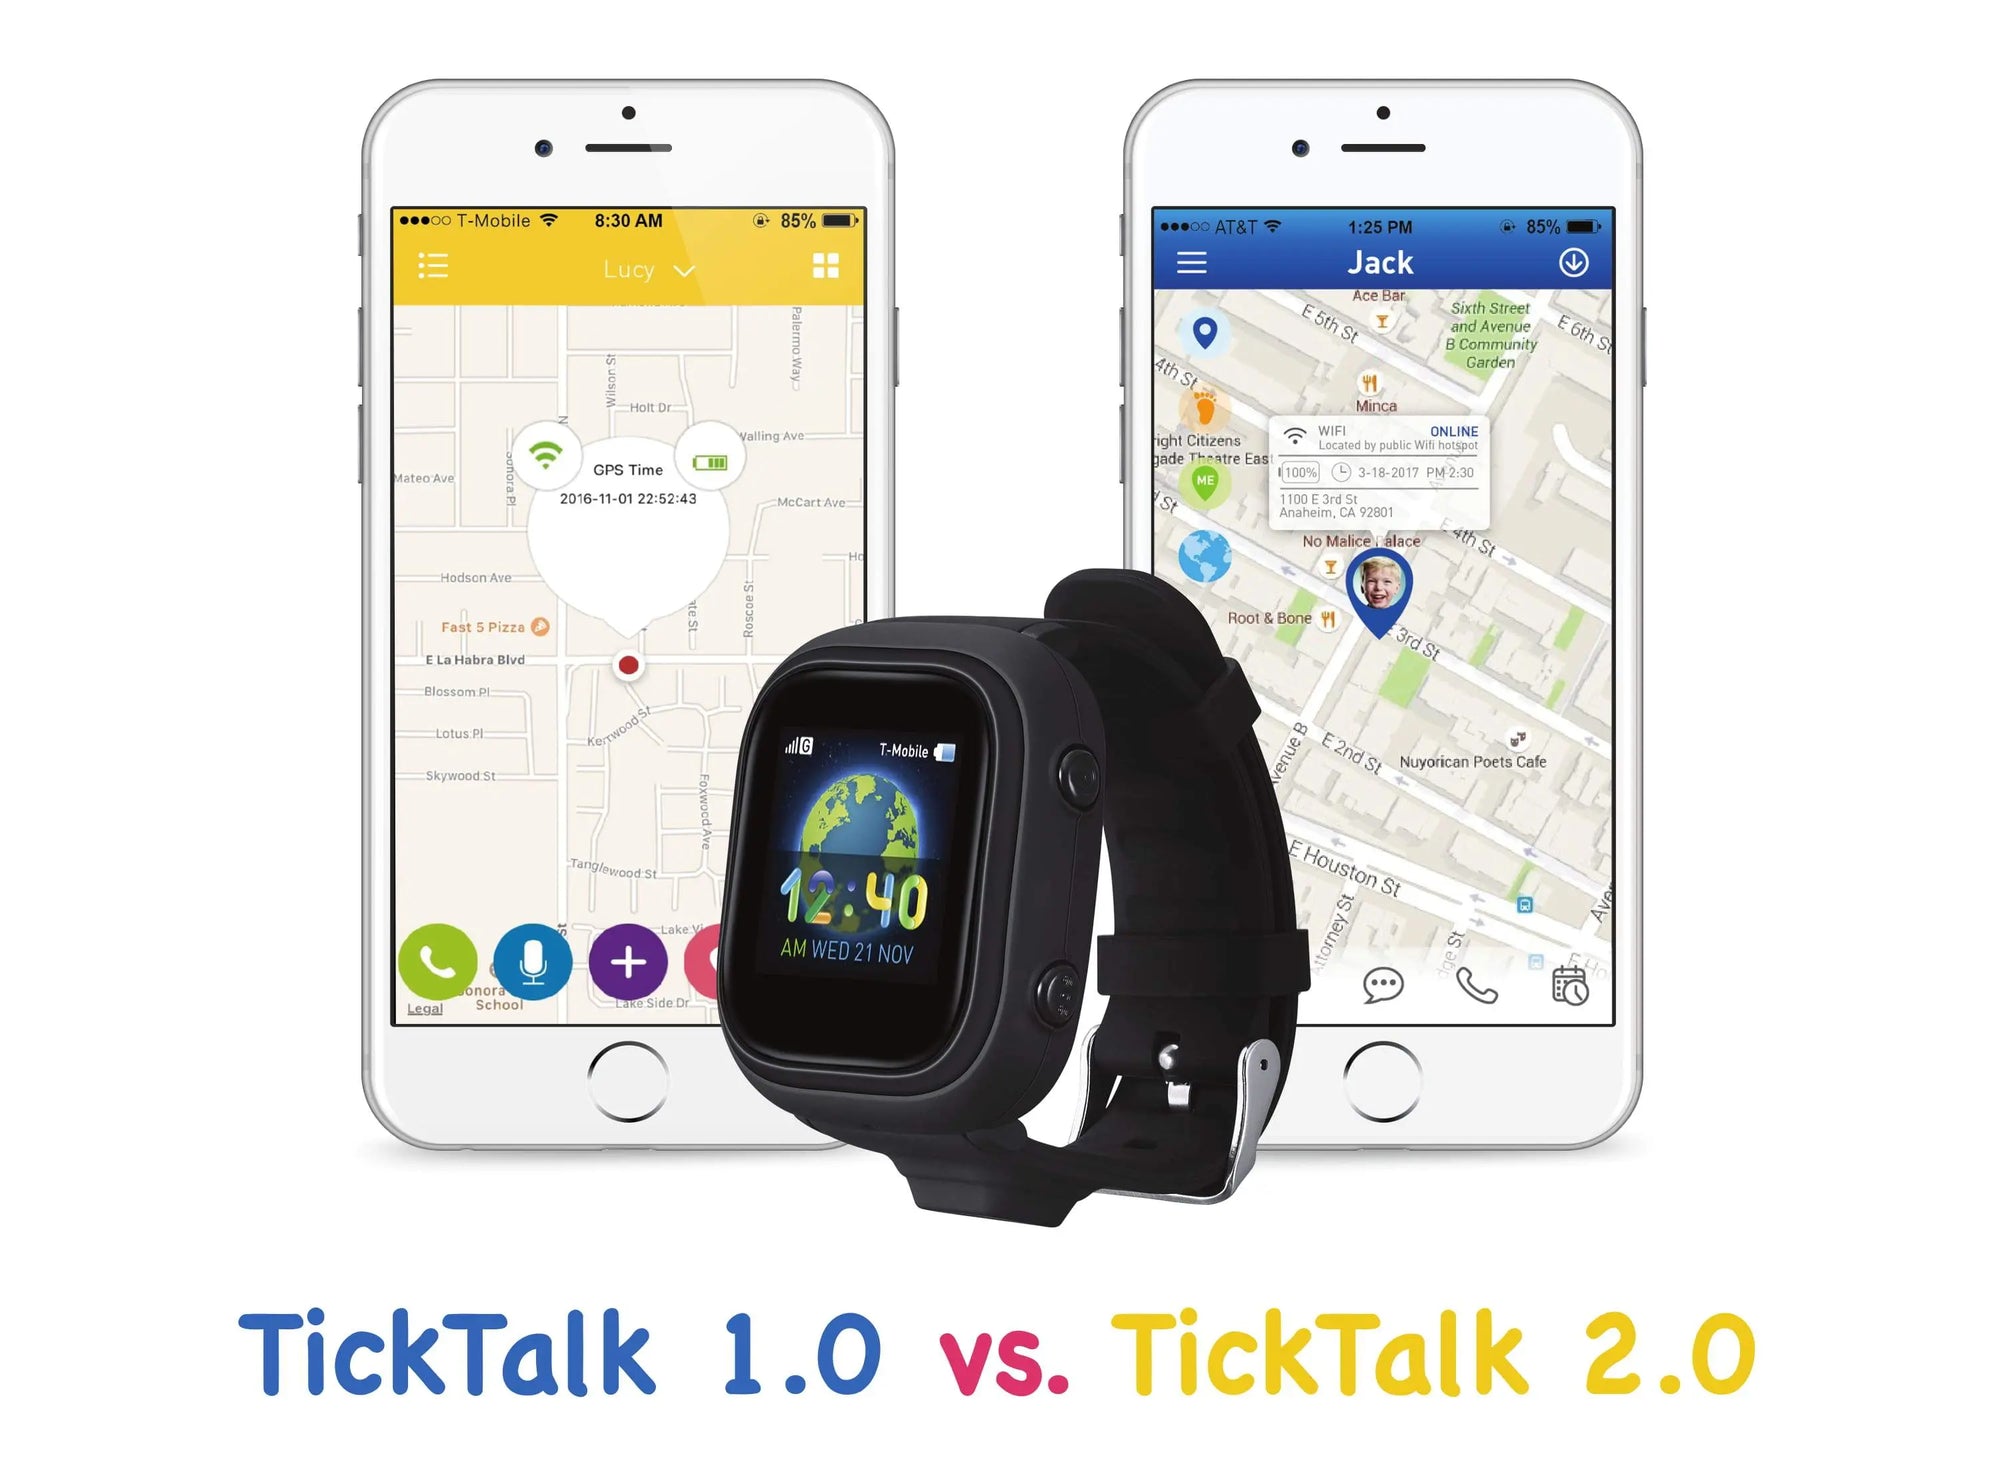 What is the Difference Between the TickTalk 1.0 and the TickTalk 2.0?